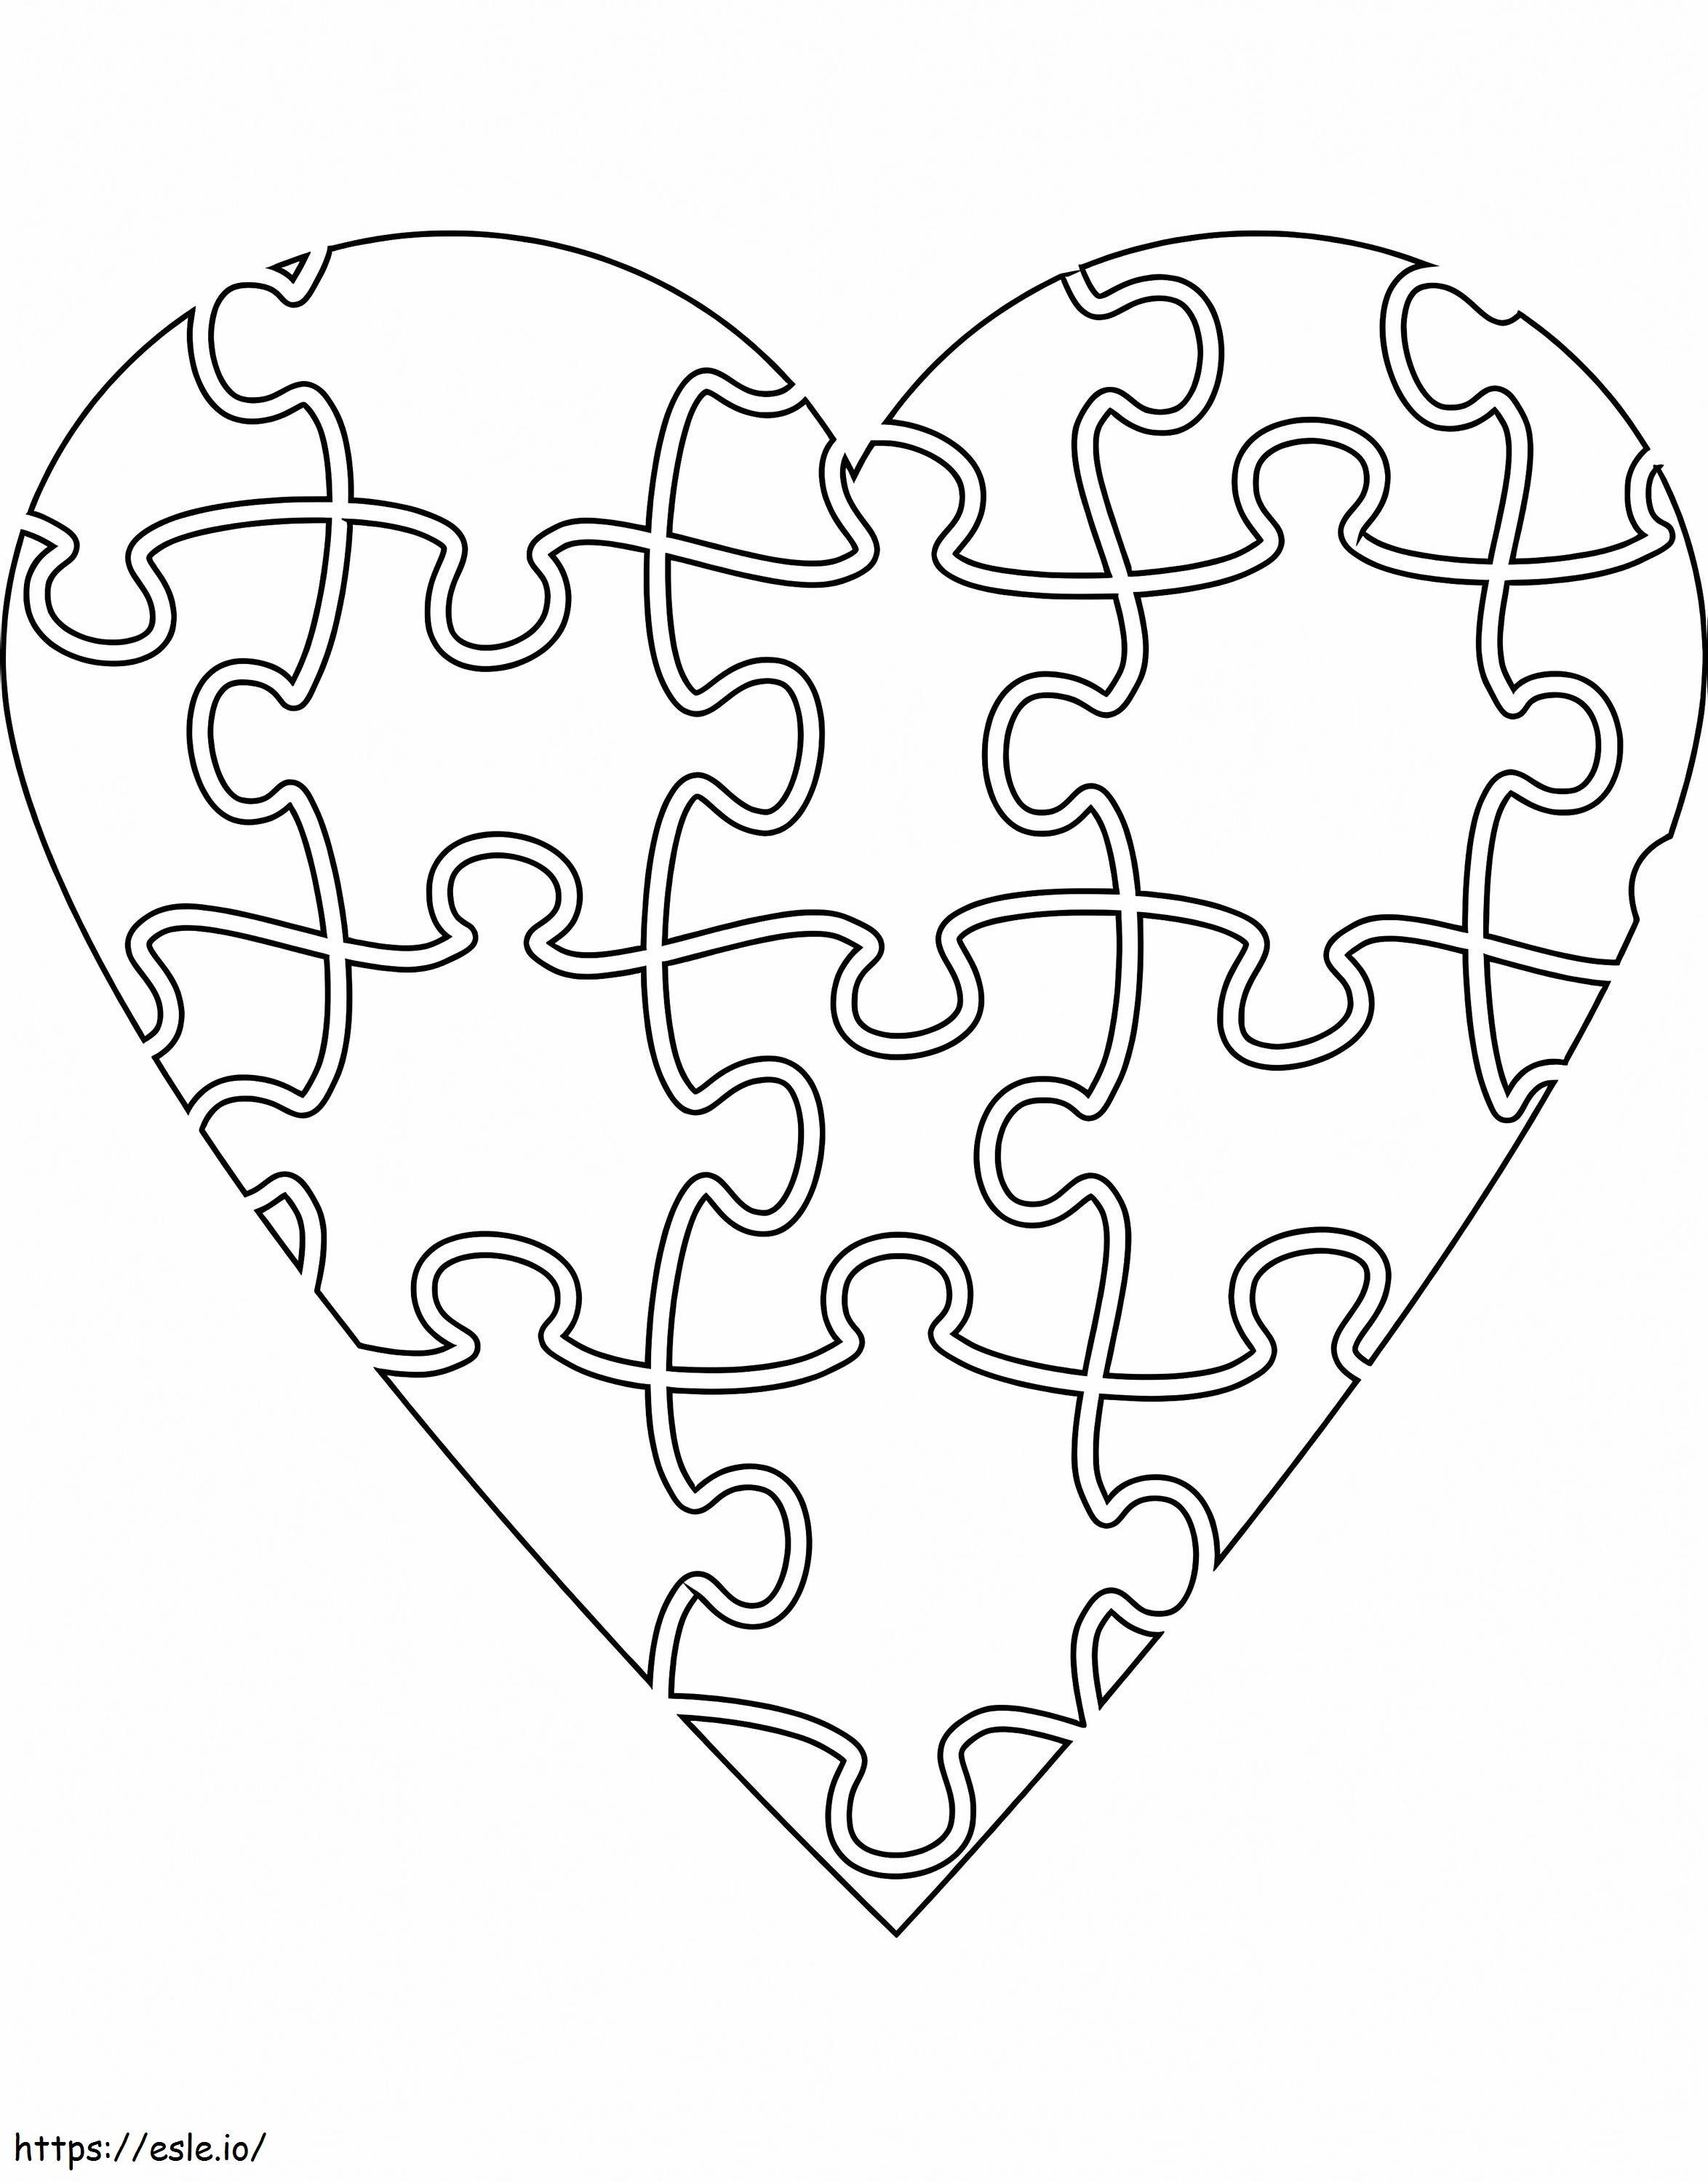 Puzzle Heart coloring page